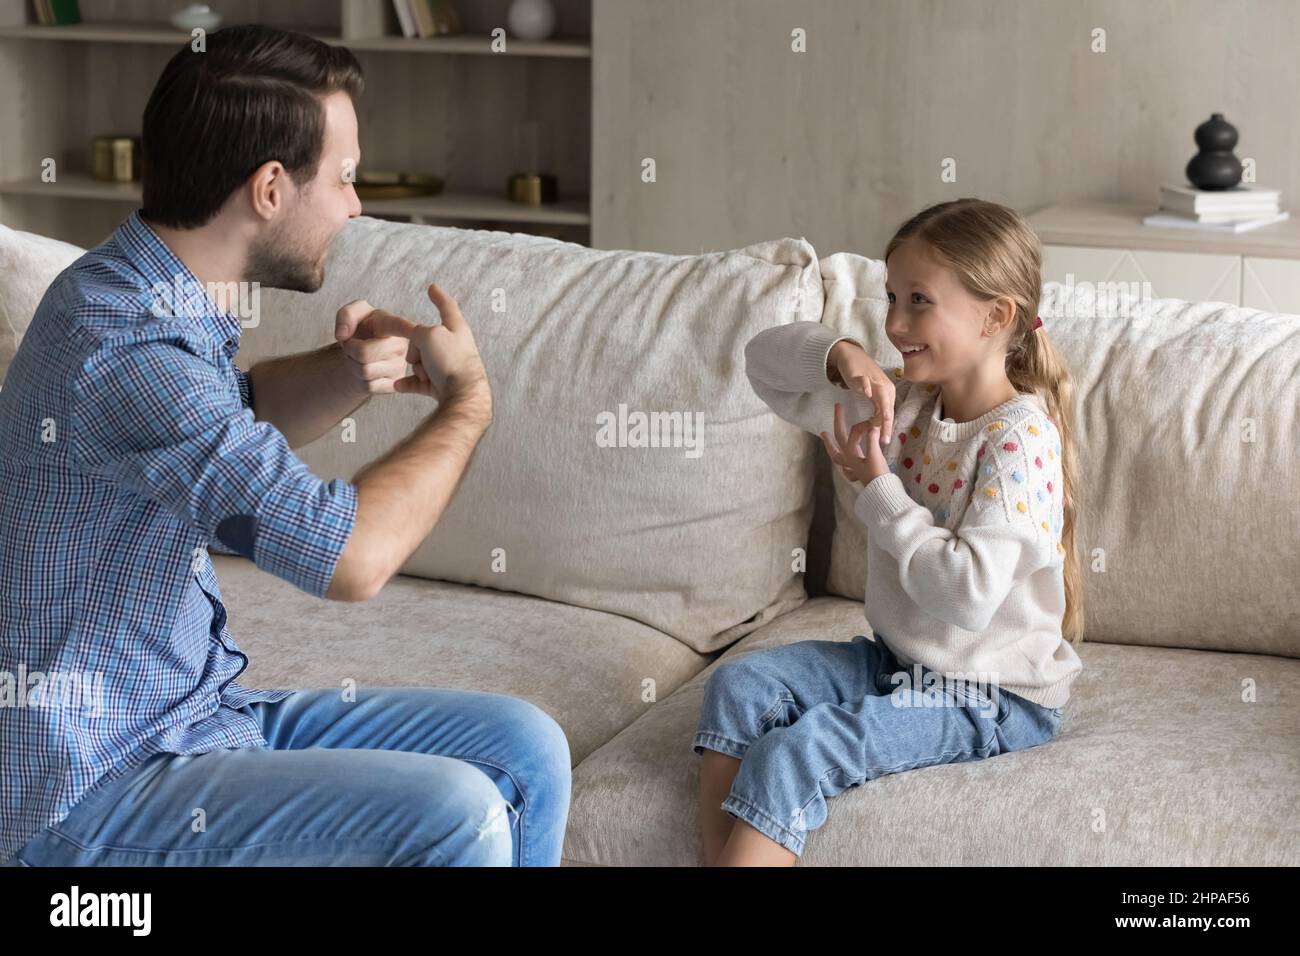 Cheerful excited dad and daughter girl with hearing disorder talking Stock Photo